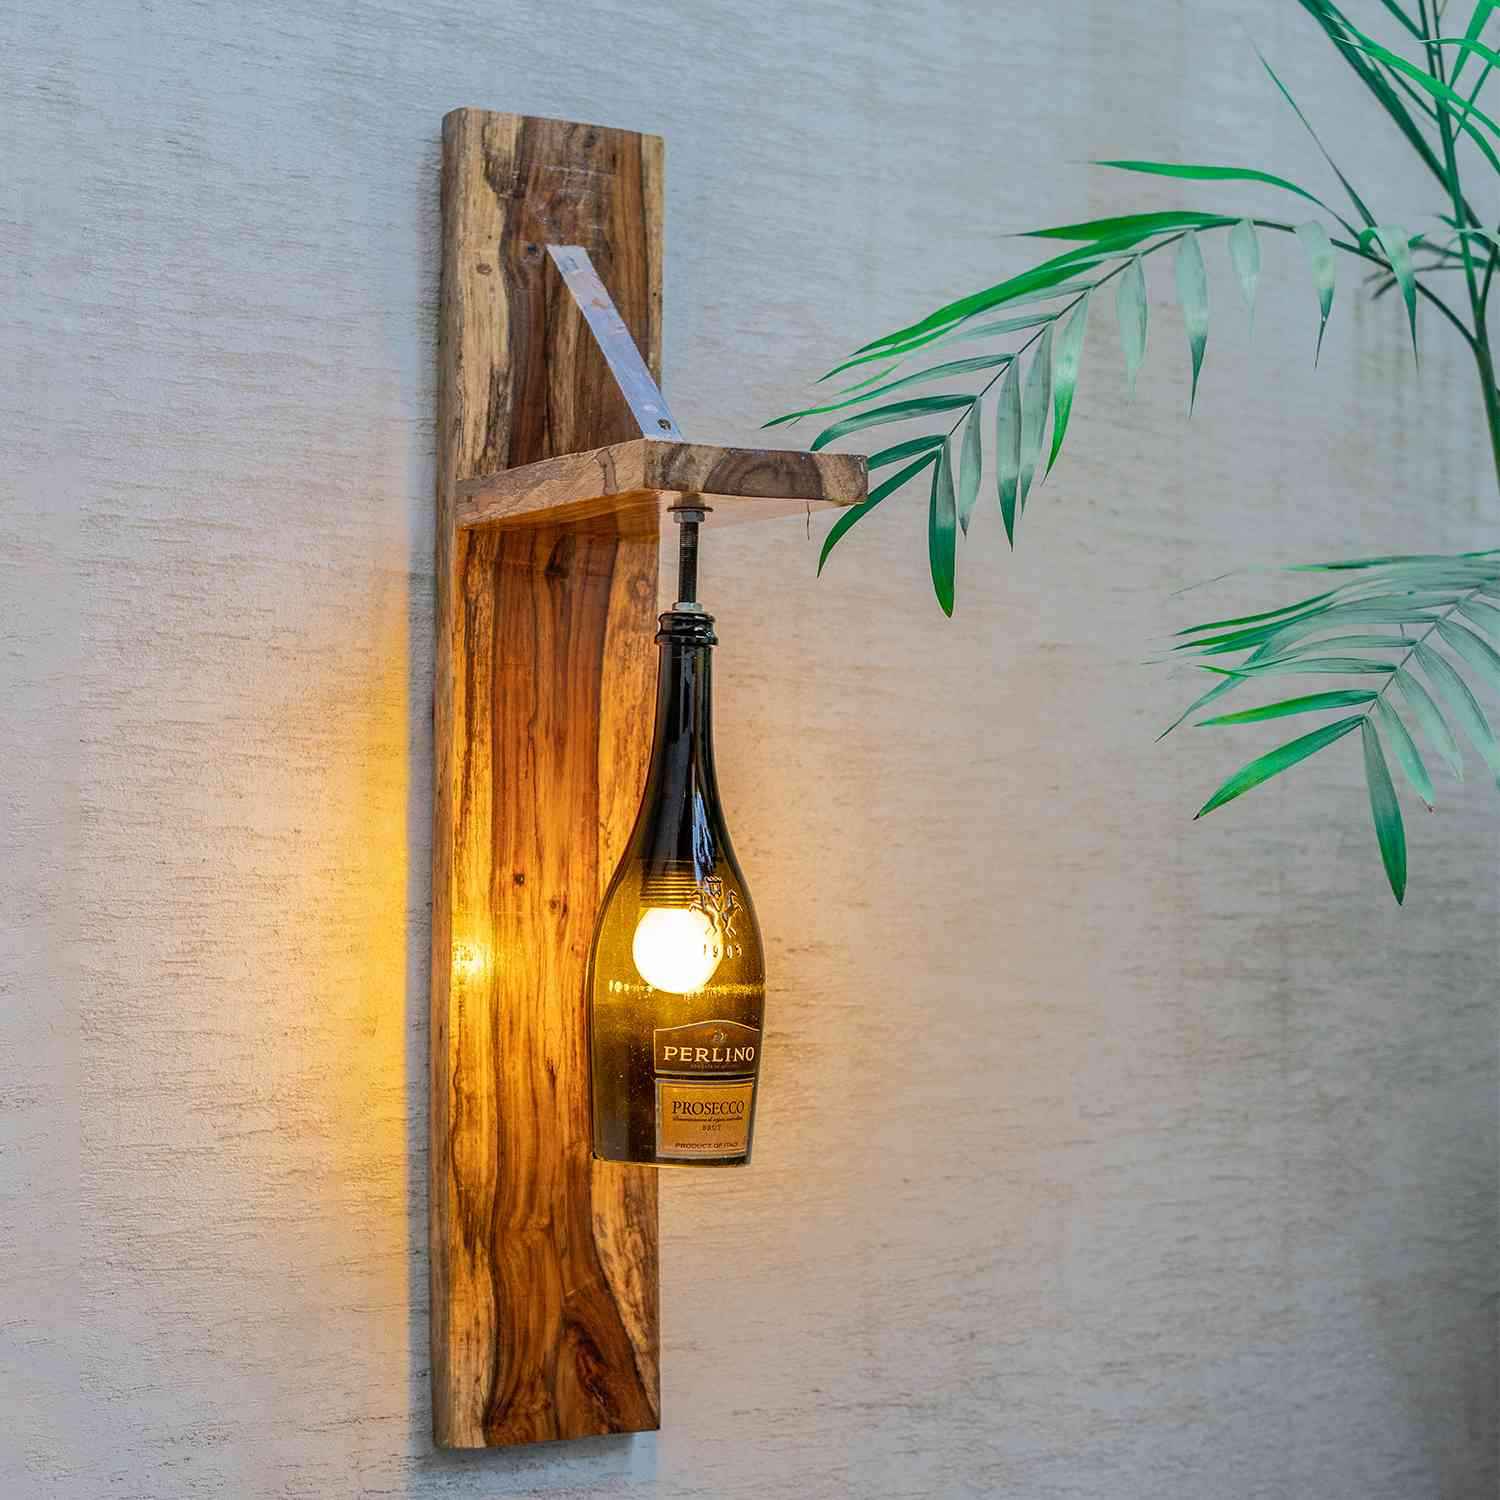 Top Solid Wall Mount Dual Lamp (Recycled Bottle)